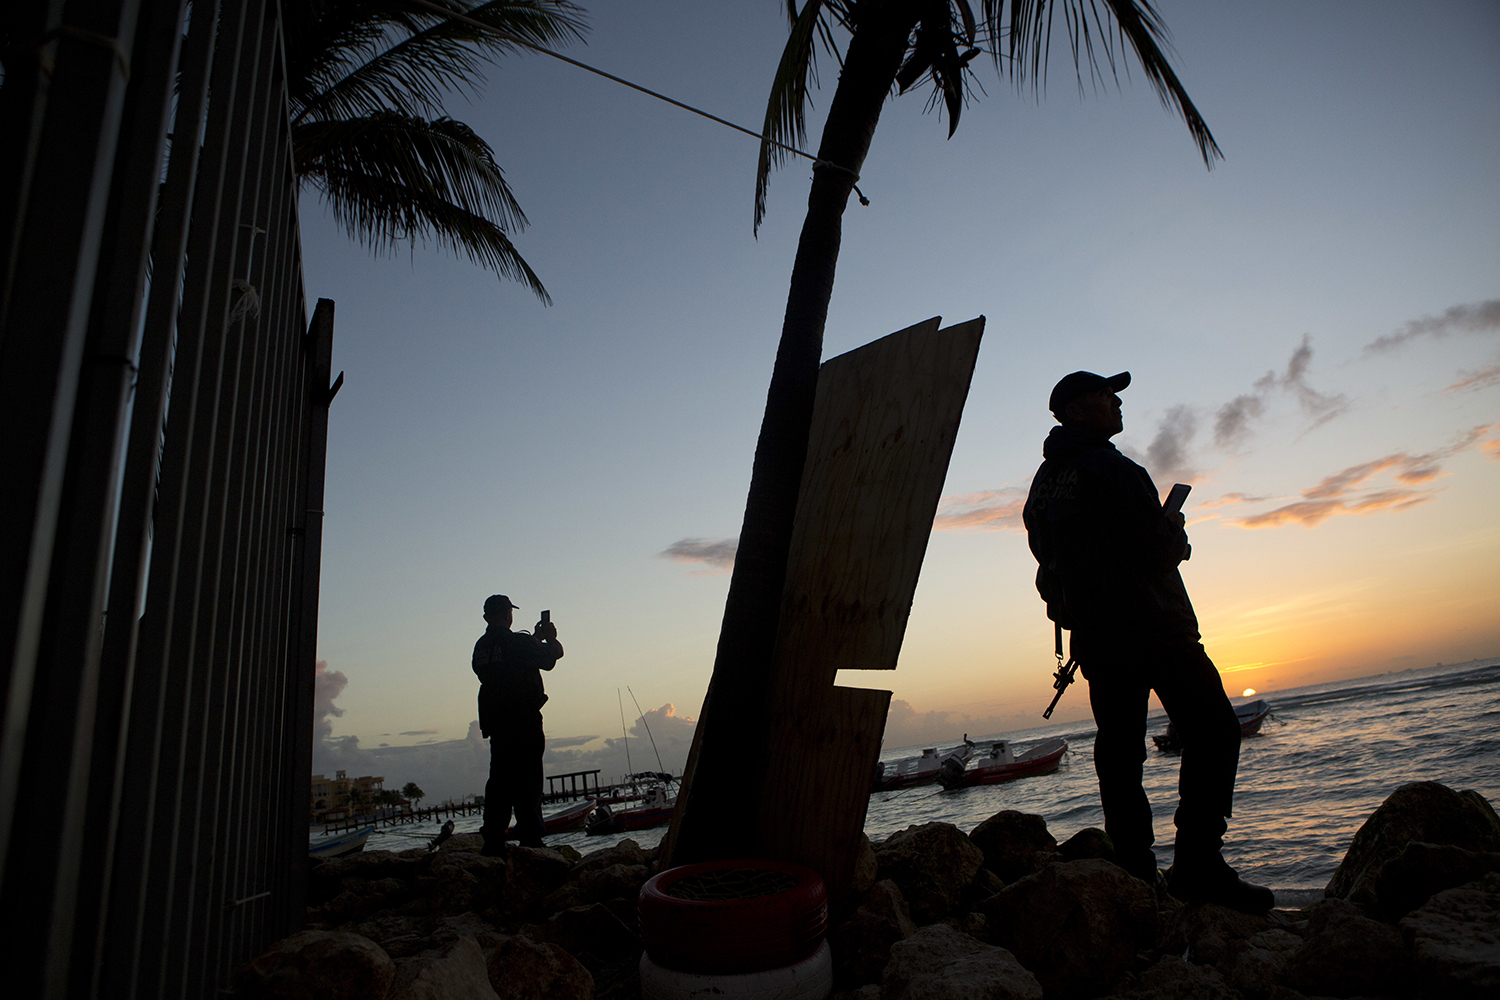 Municipal police watch the sunrise as they stand guard on the beach in front of the Blue Parrot club, a day after a deadly early morning shooting, in Playa del Carmen, Mexico, Tuesday, Jan. 17, 2017. Mexican authorities said Tuesday they are investigating whether extortion, street-level drug sales or a murder plot was the motive behind a shooting at an electronic music festival at a Caribbean resort town that left three foreigners and two Mexicans dead.(AP Photo/Rebecca Blackwell)